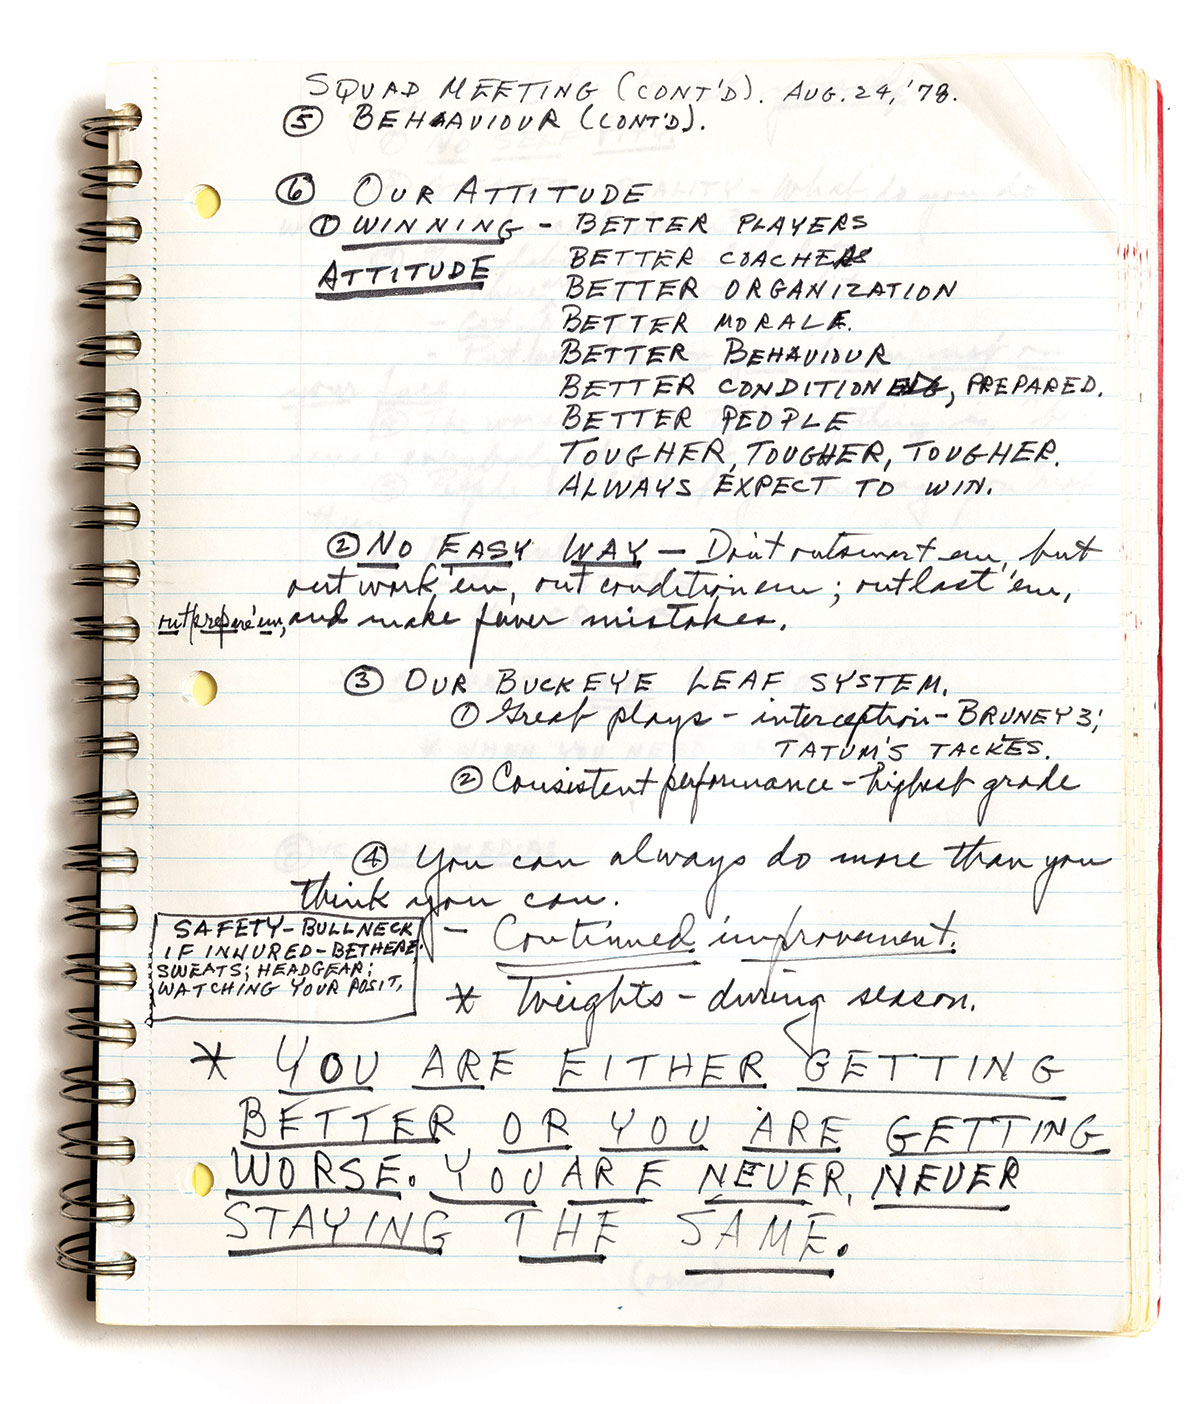 A slightly yellowed notebook is opened to a page with notes made by Woody Hayes, some in all capital block letters and some in cursive. Legible text says: Squad meeting (continued) Aug. 24, 1978. 6. Our attitude—winning attitude. Better players, better coaches, better organization, better morale, better behavior, better conditioning, prepared, better people, tougher, tougher, tougher. Always expect to win. At the bottom of the page, underlined, are the words: You are either getting better or you are getting worse. You are never, never staying the same